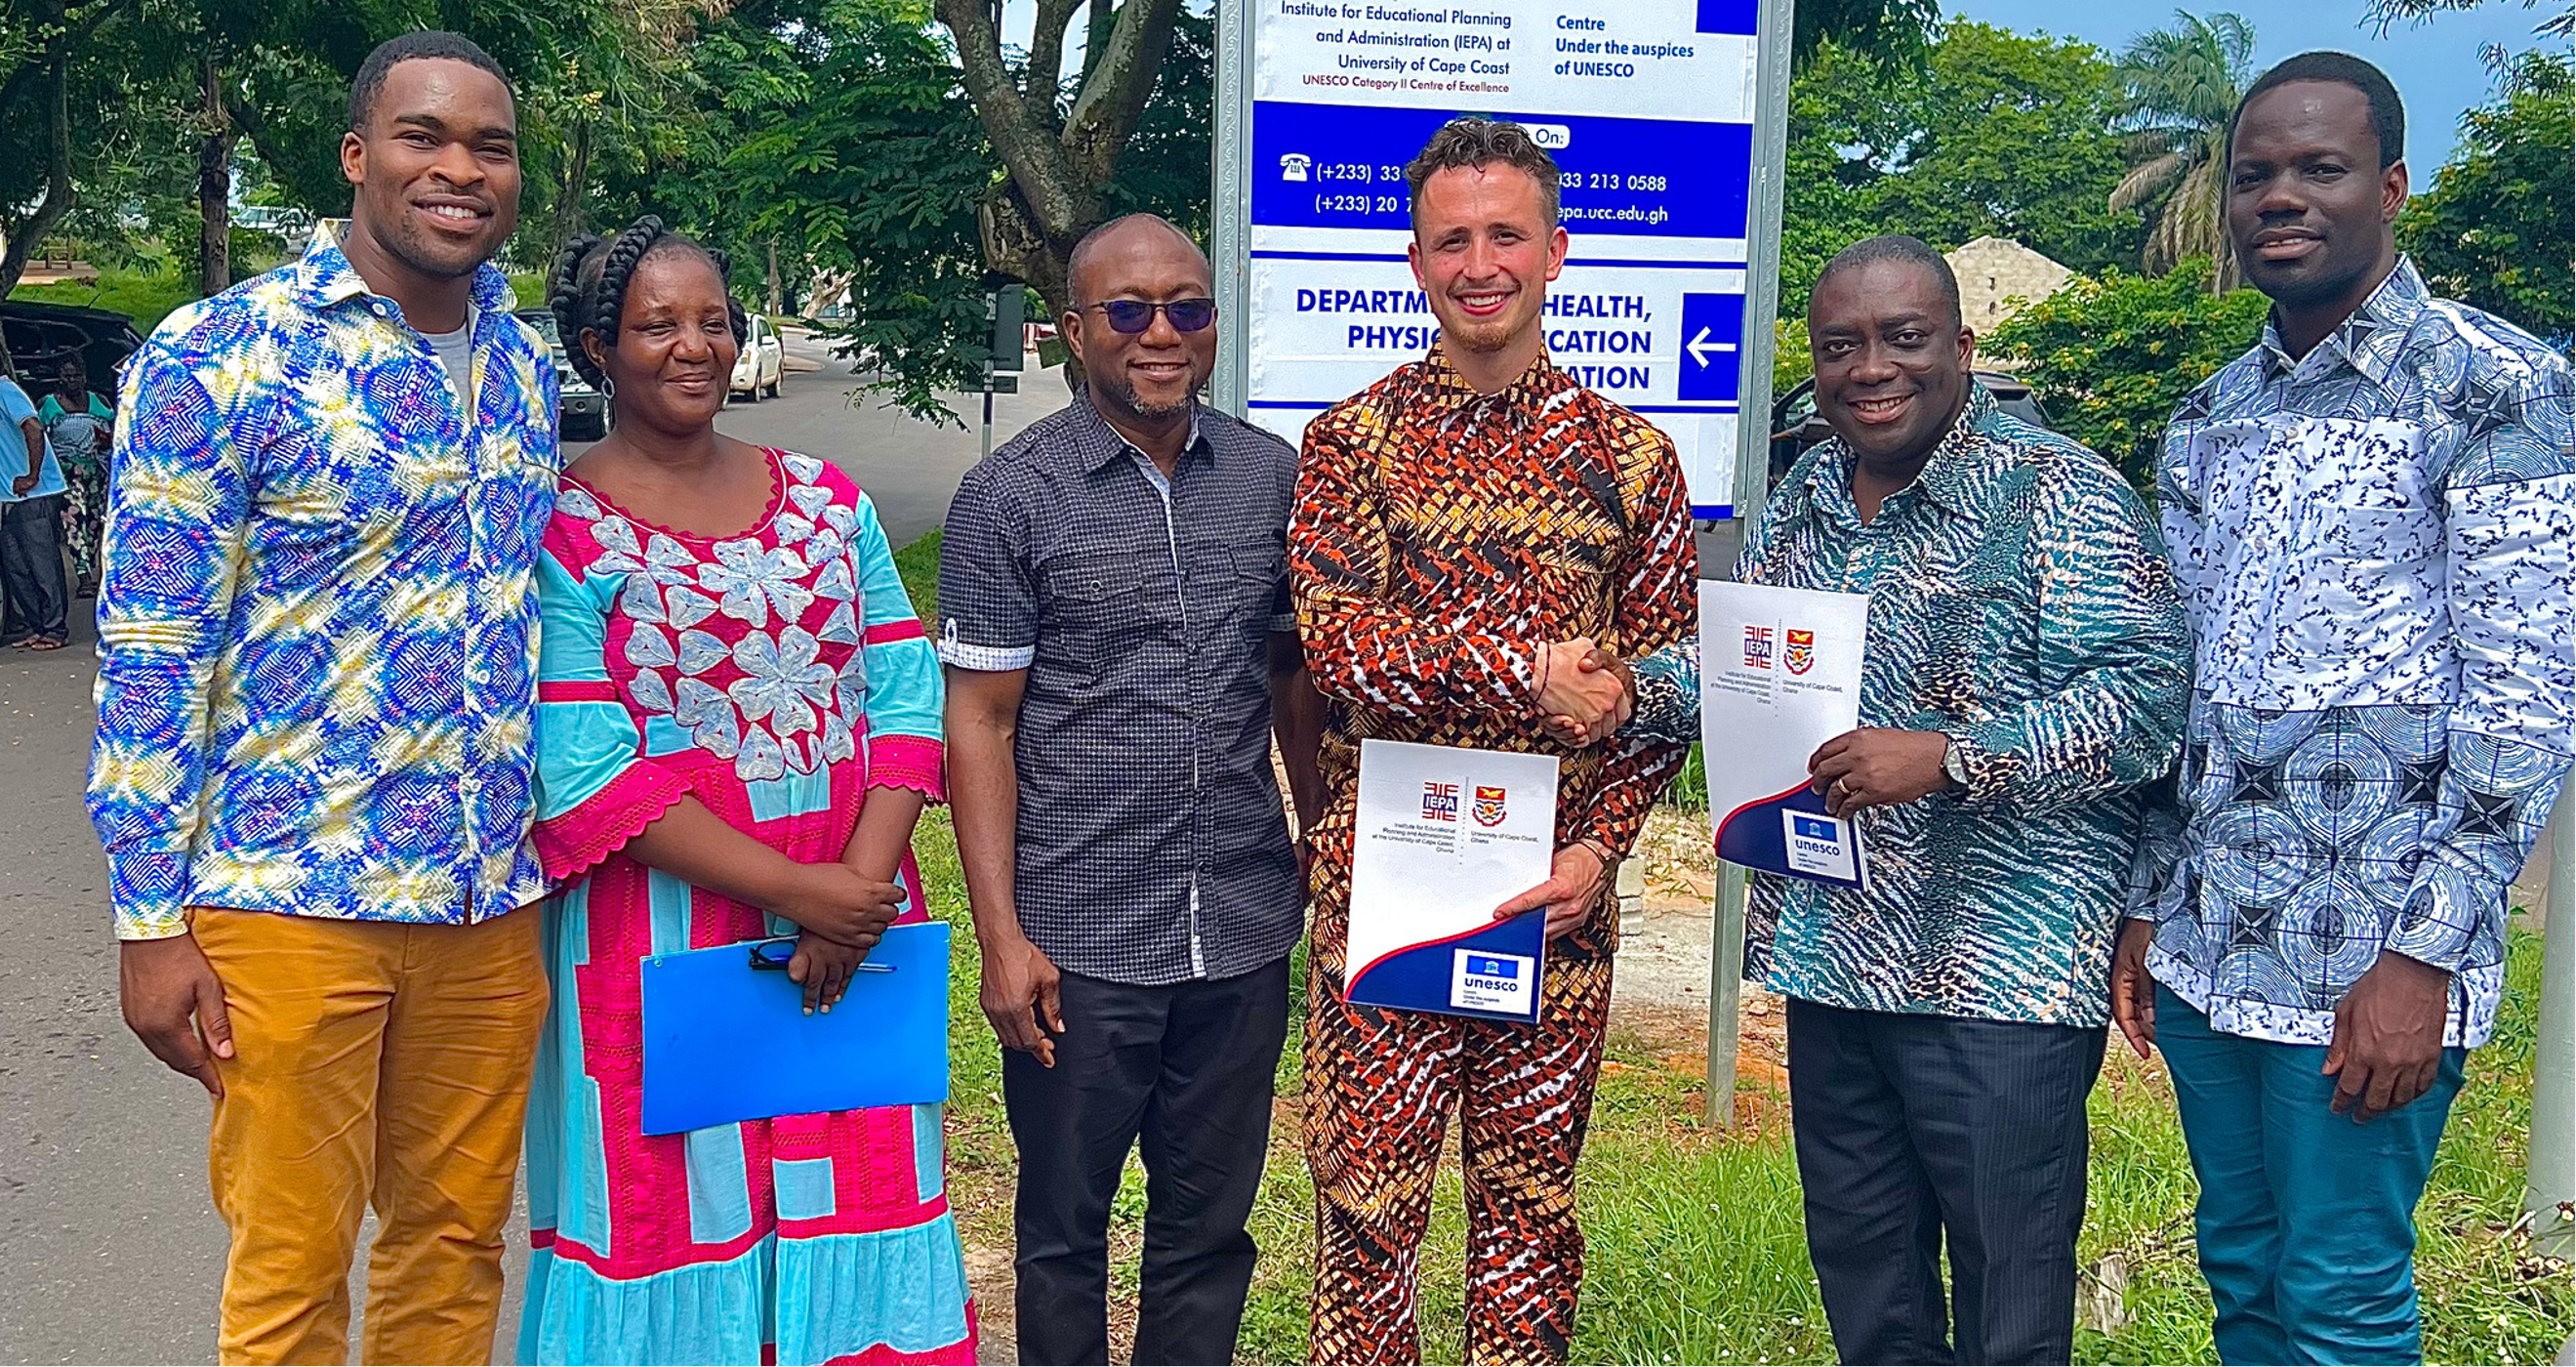 Members of True Community (including College of Education doctoral student Ebenezer Mensah, far right) and Institute for Educational Planning and Administration at the University of Cape Coast signed a memorandum of understanding to expand access to first aid and CPR skills in Ghana.